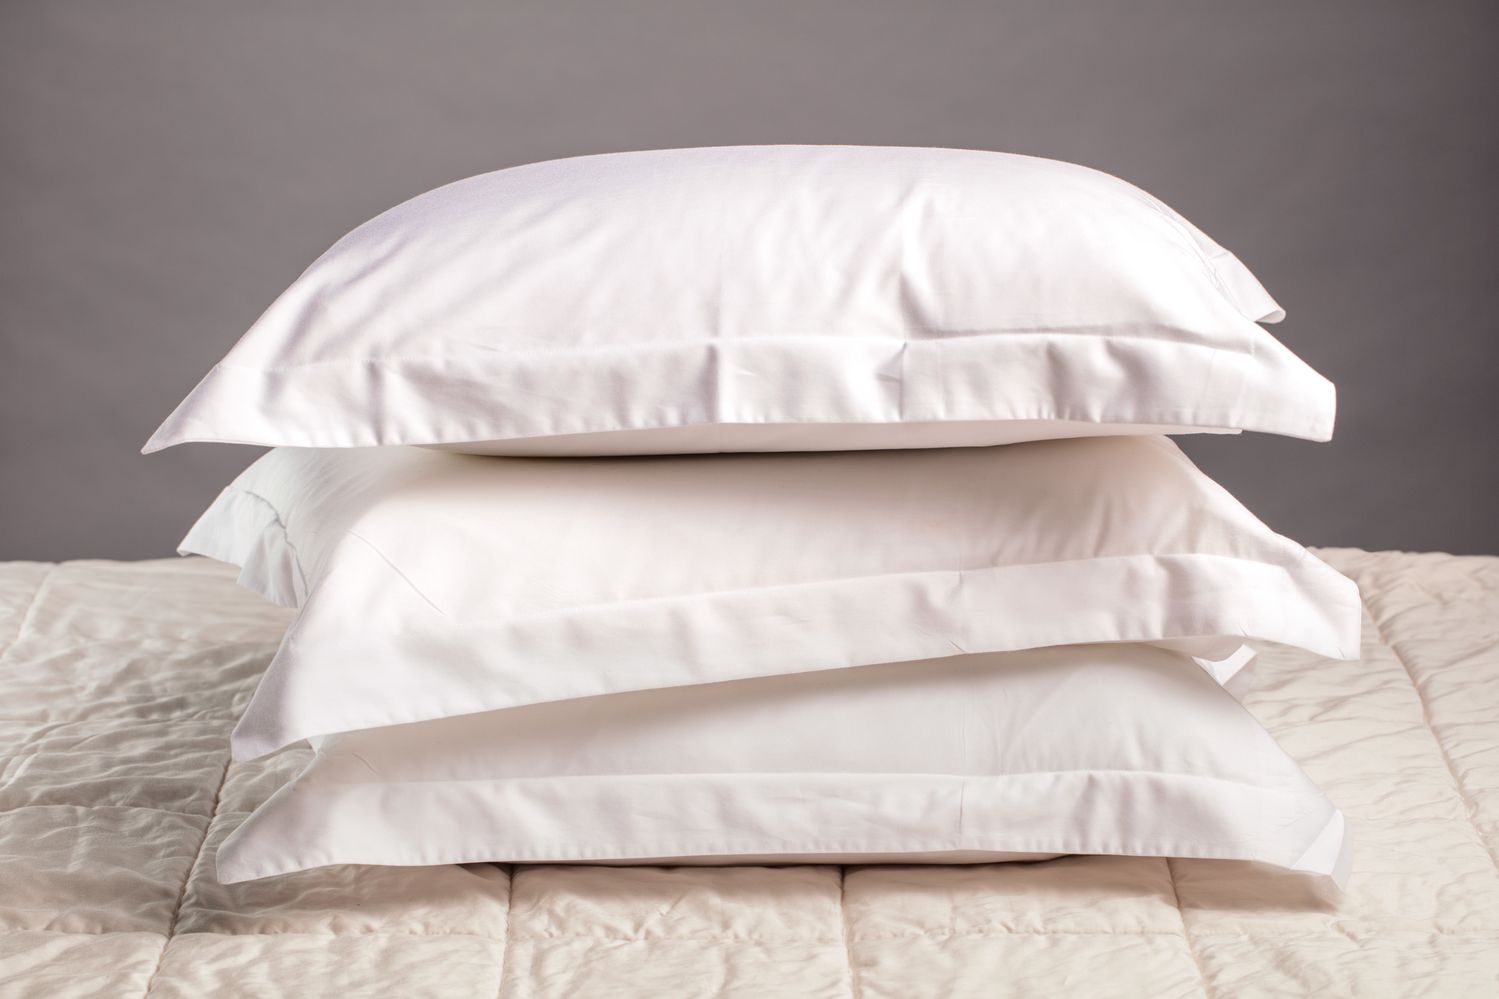 There's also a pillow menu: choose between the standard-issue lightweight Sheridan Ultimate Comfort Pillow, a Memory Foam Pillow or Feather & Down Pillow.